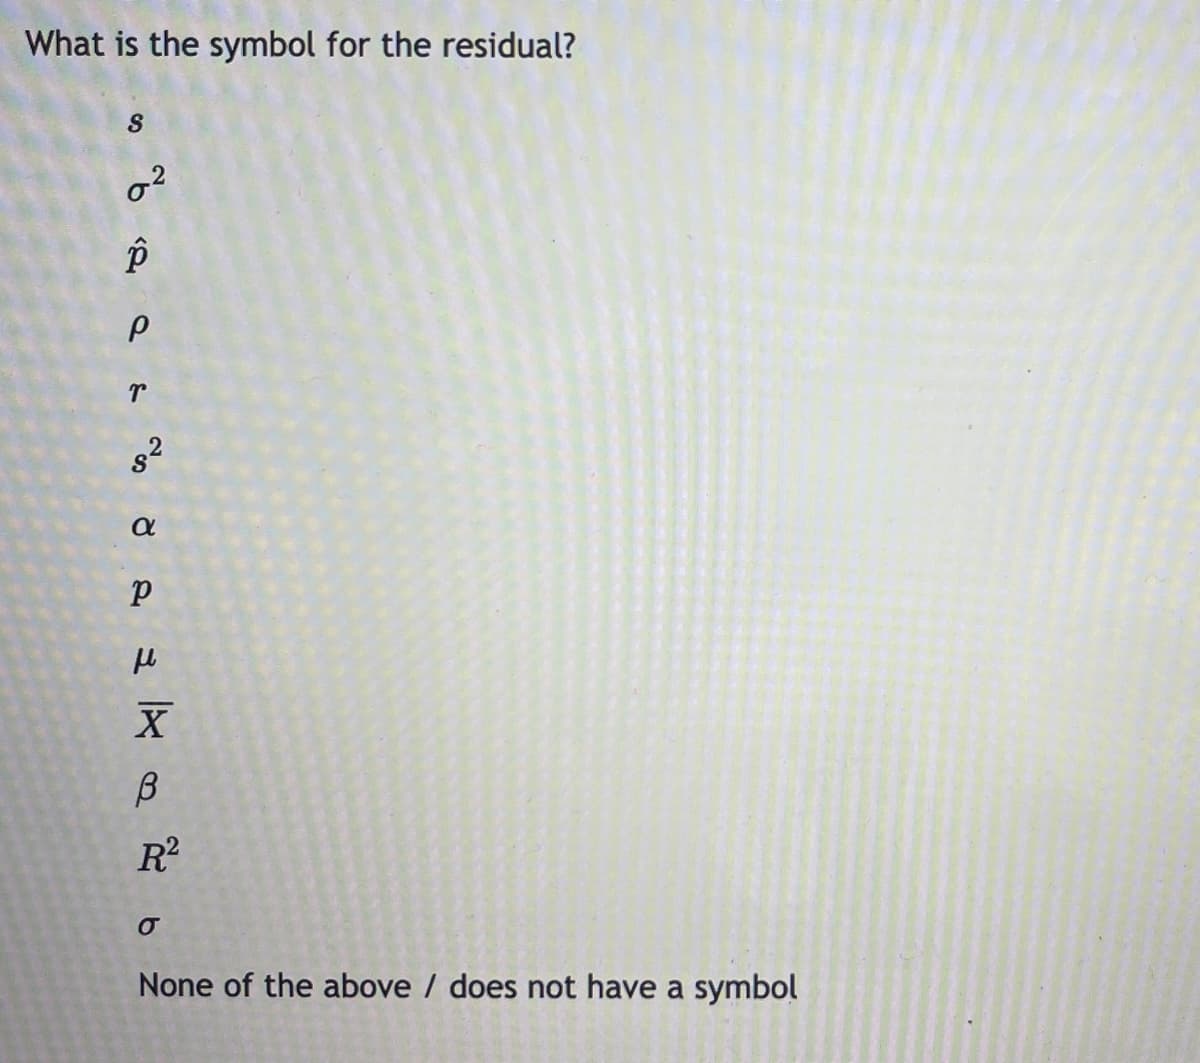 What is the symbol for the residual?
R?
None of the above / does not have a symbol
